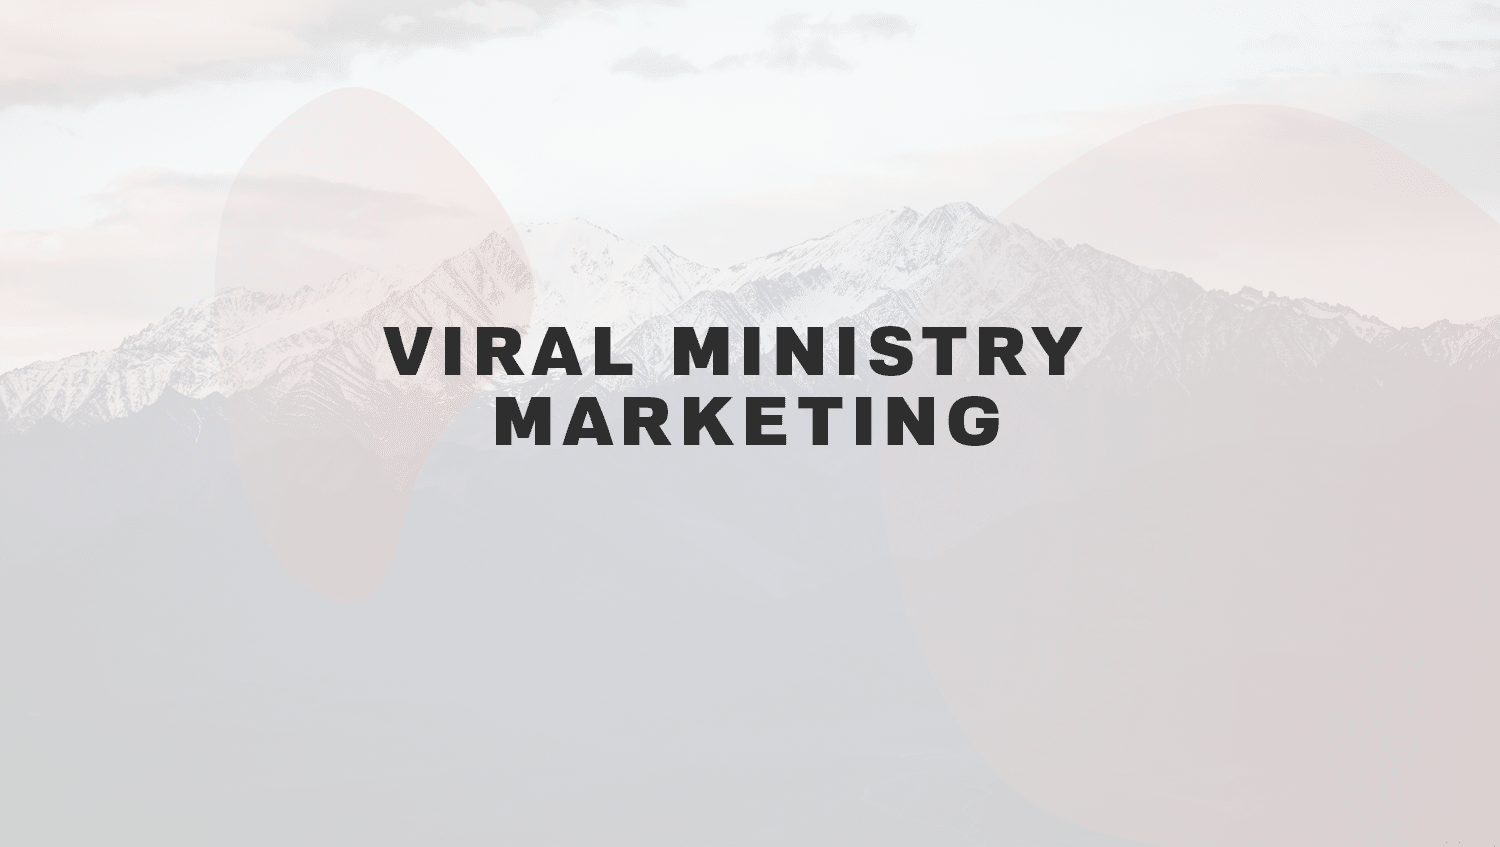 Article – Viral Ministry Marketing